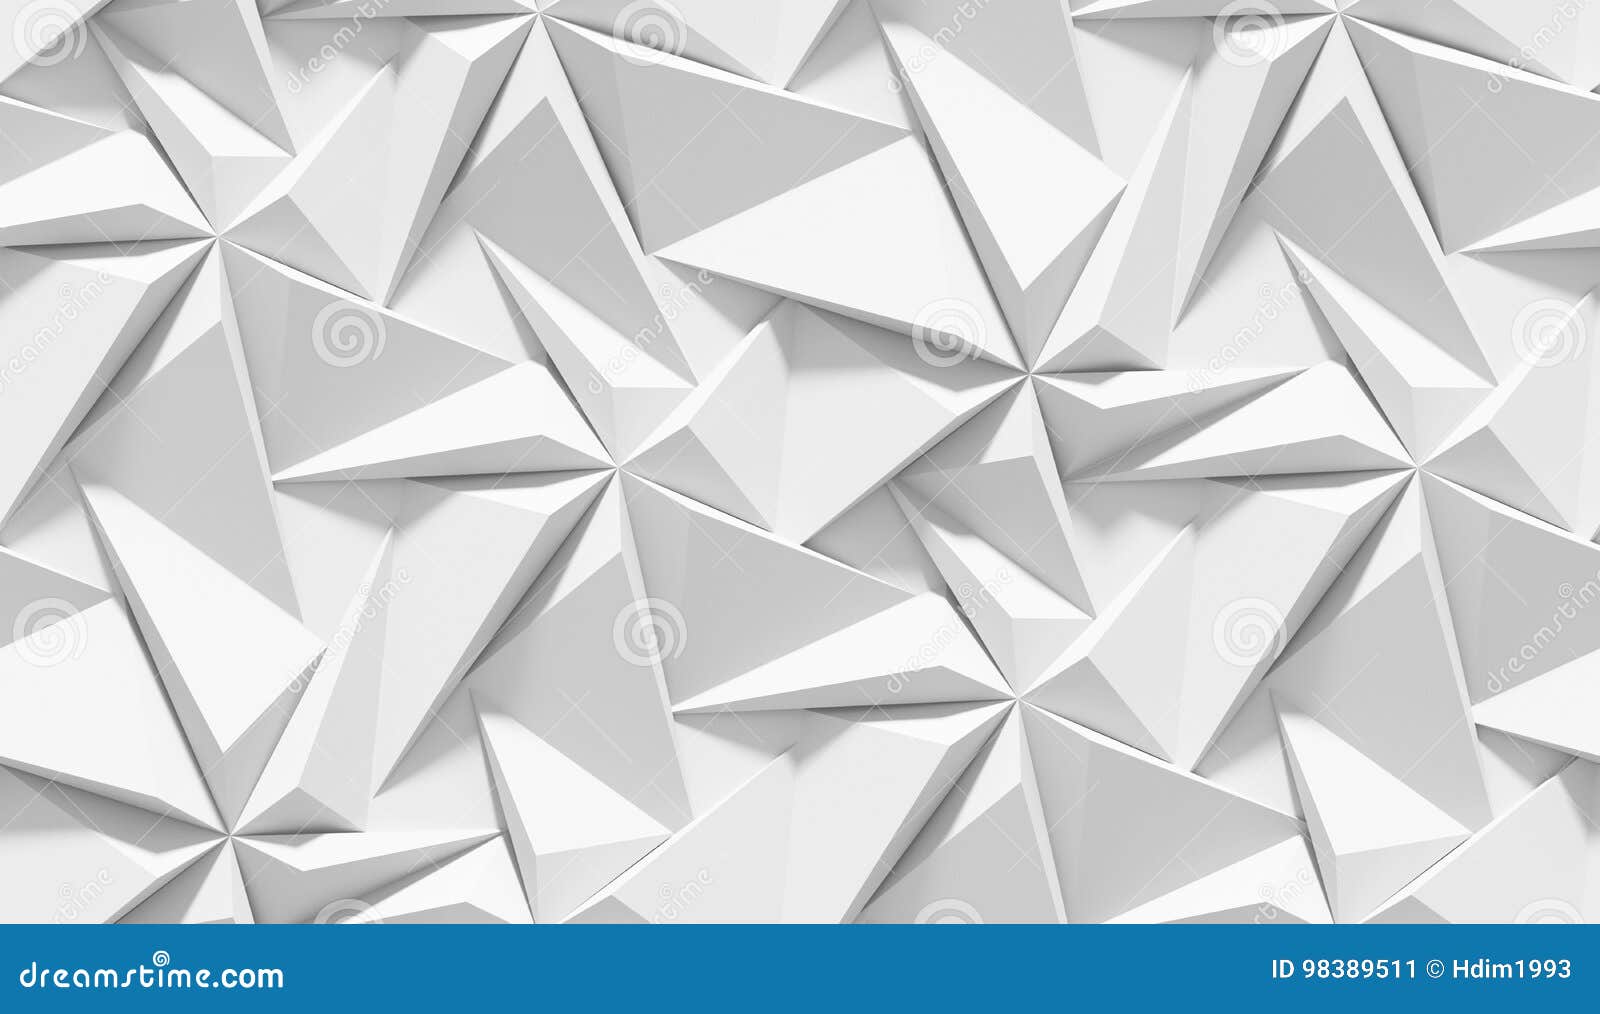 white shaded abstract geometric pattern. origami paper style. 3d rendering background.